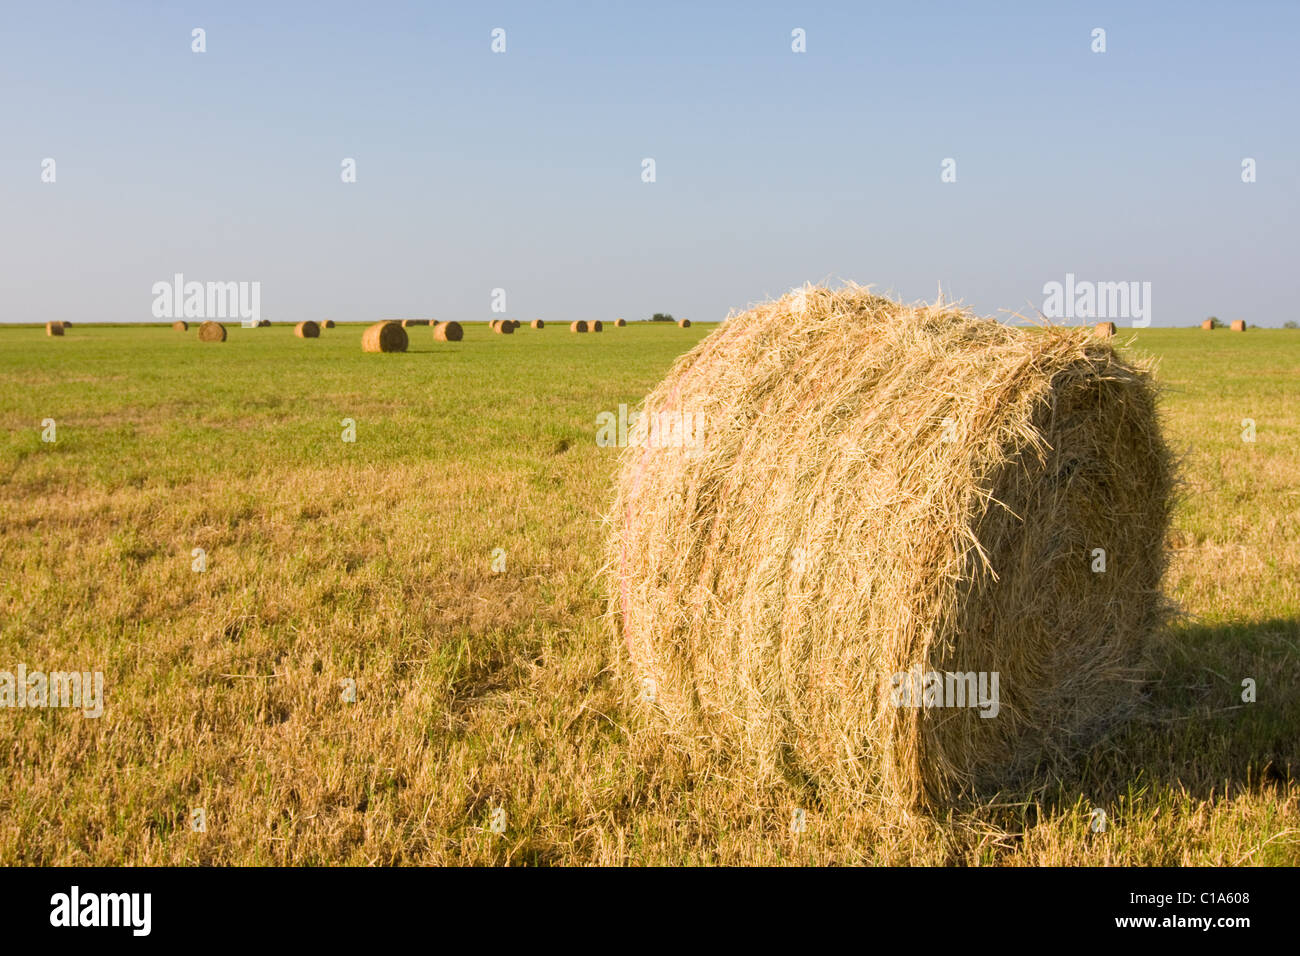 Close up a single roll of hay or haybale in a field with many other rolls in the background. Stock Photo